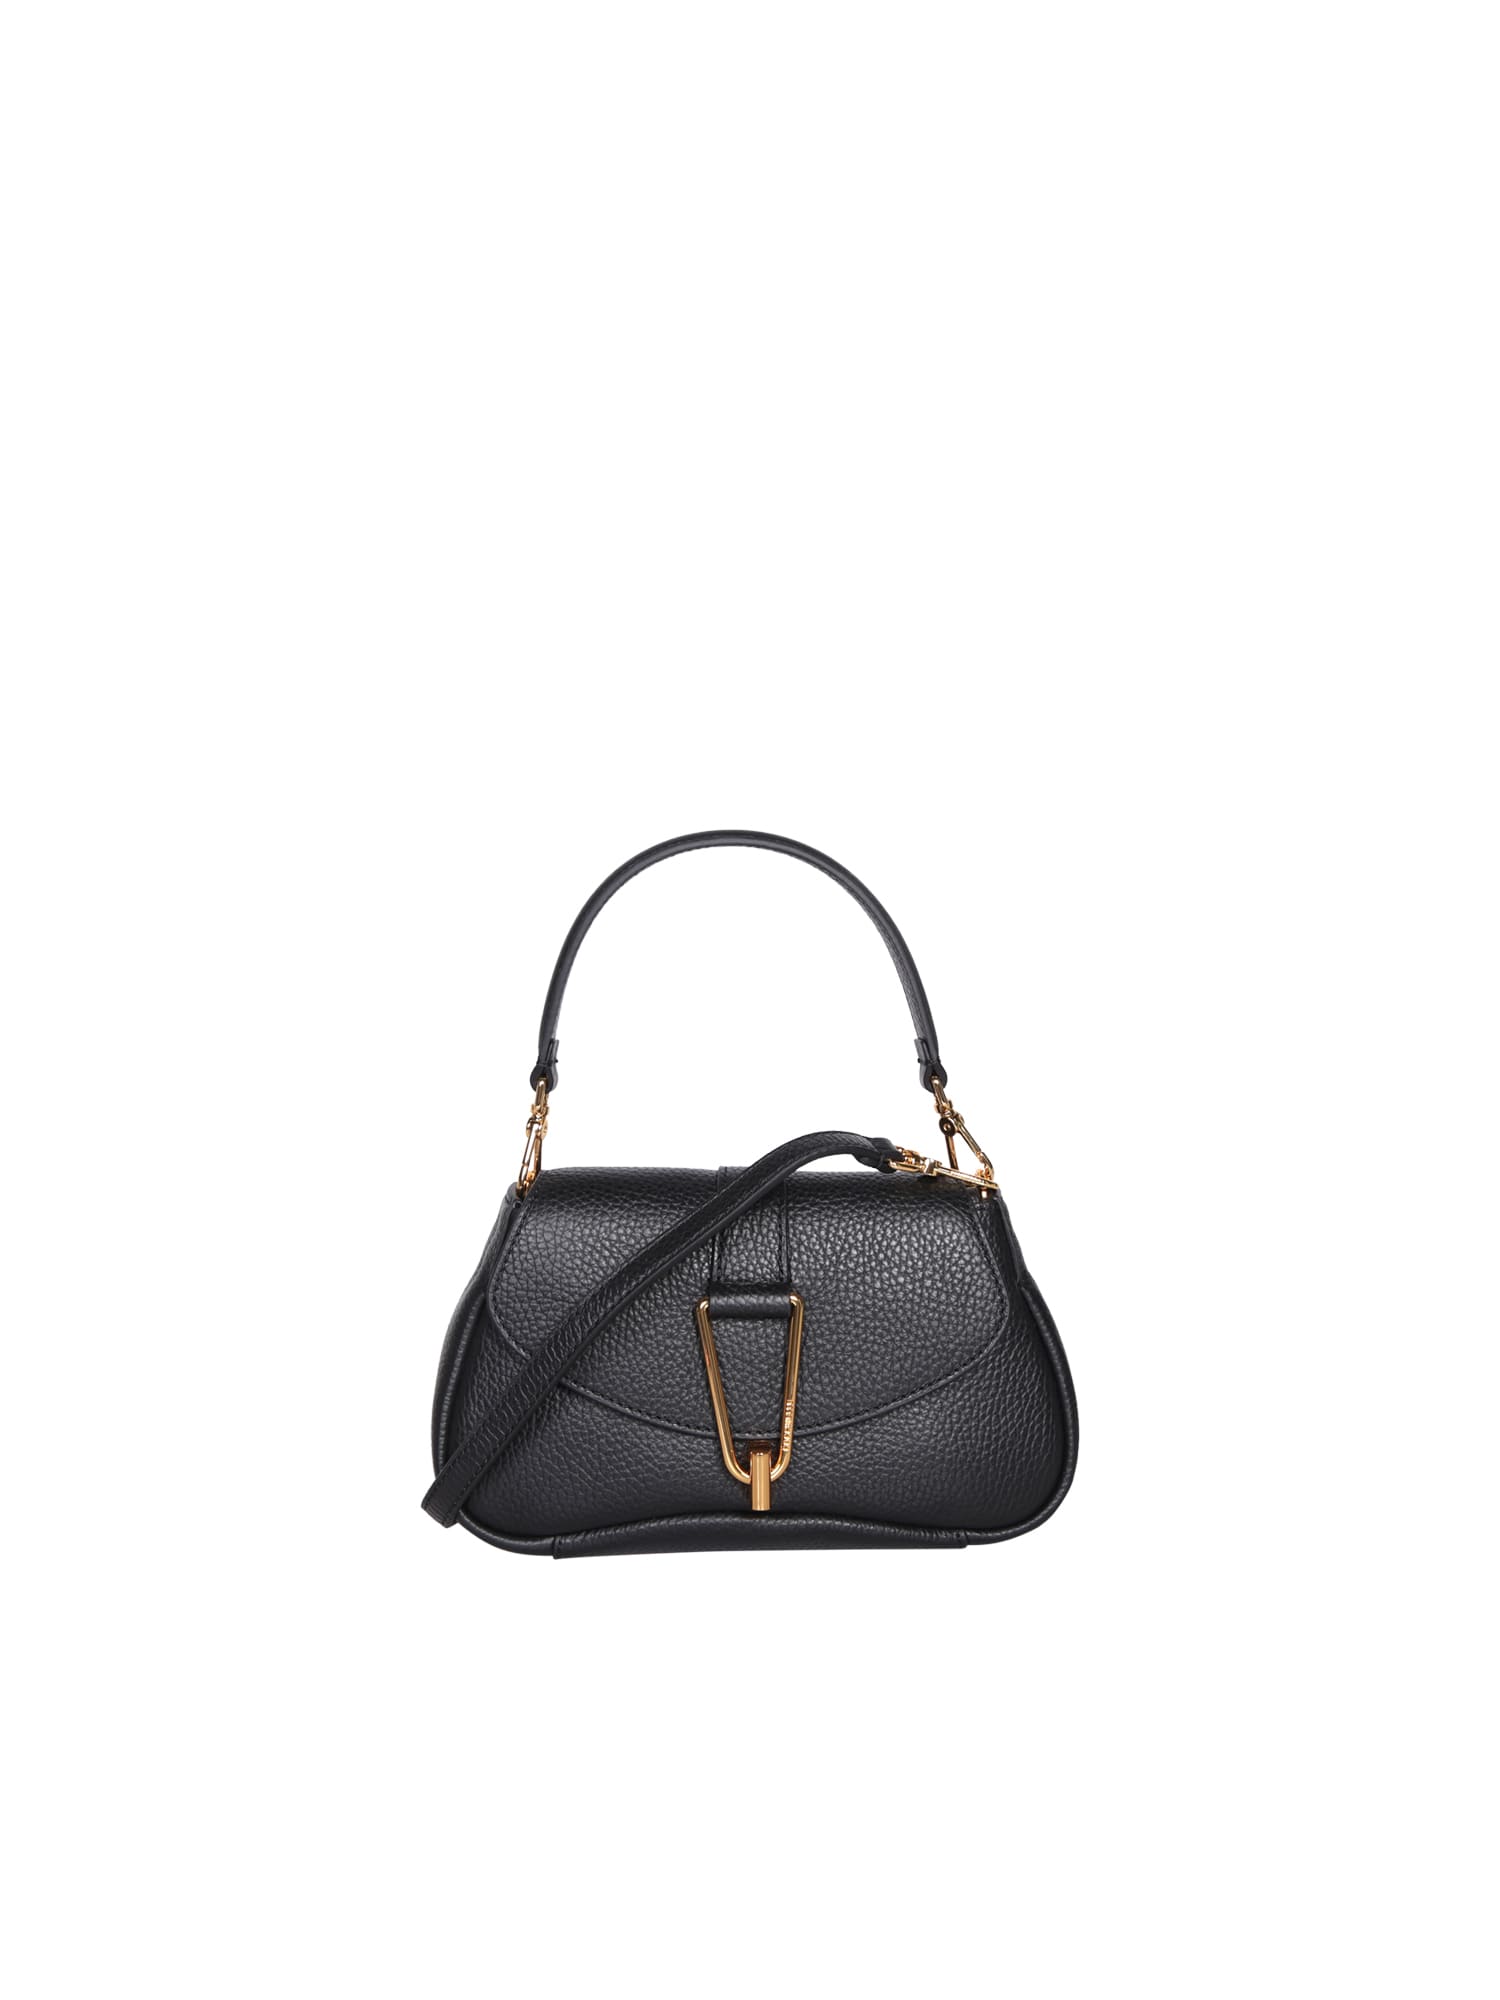 COCCINELLE HIMMA SMALL BLACK BAG BY COCCINELLE